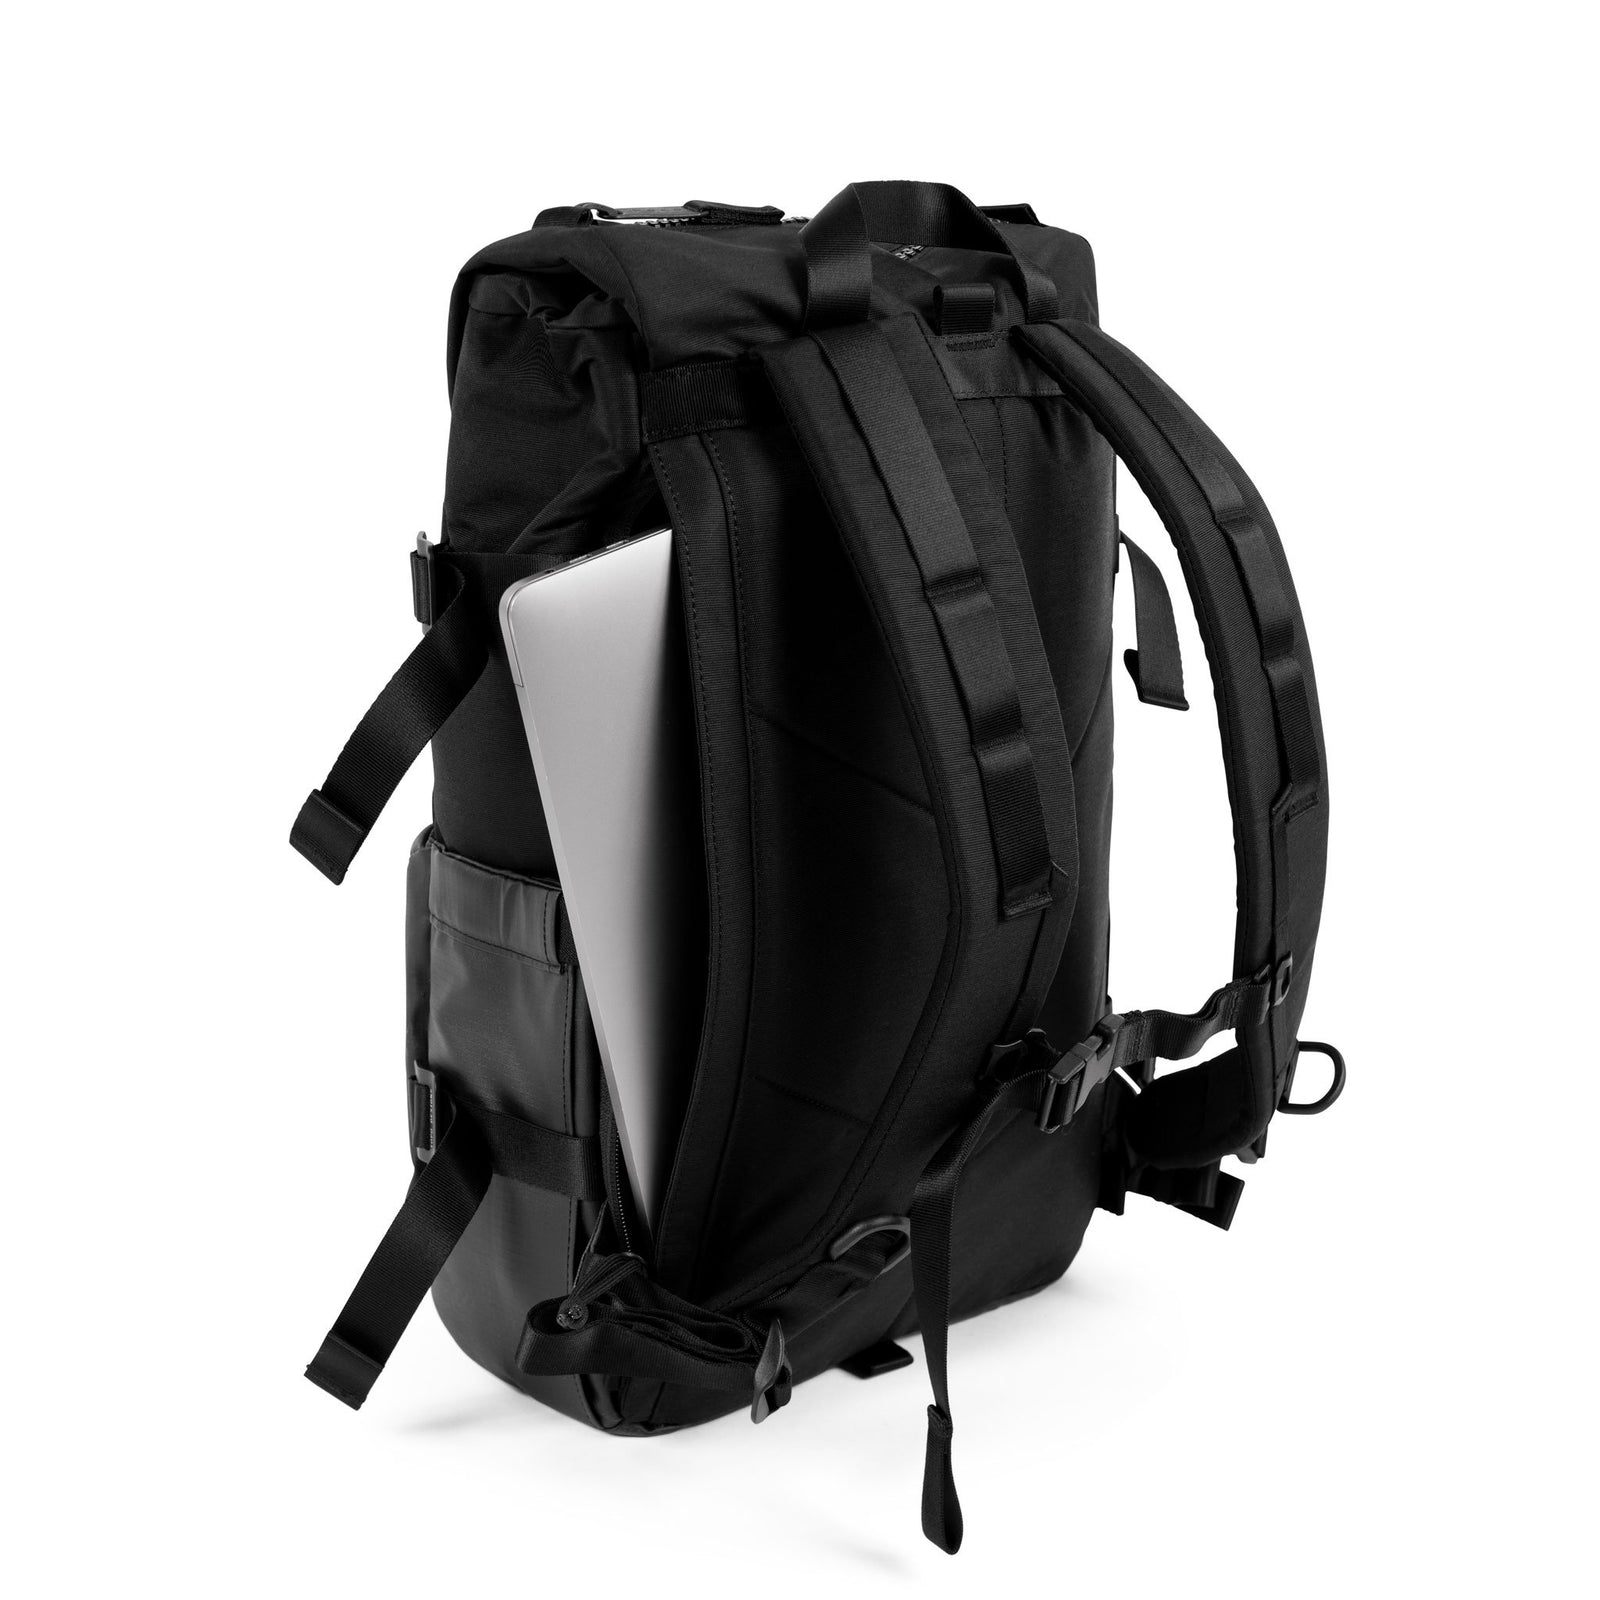 3/4 Back Detail Shot of the Topo Designs Rover Pack Premium showing external access to padded laptop sleeve in "Premium Black".